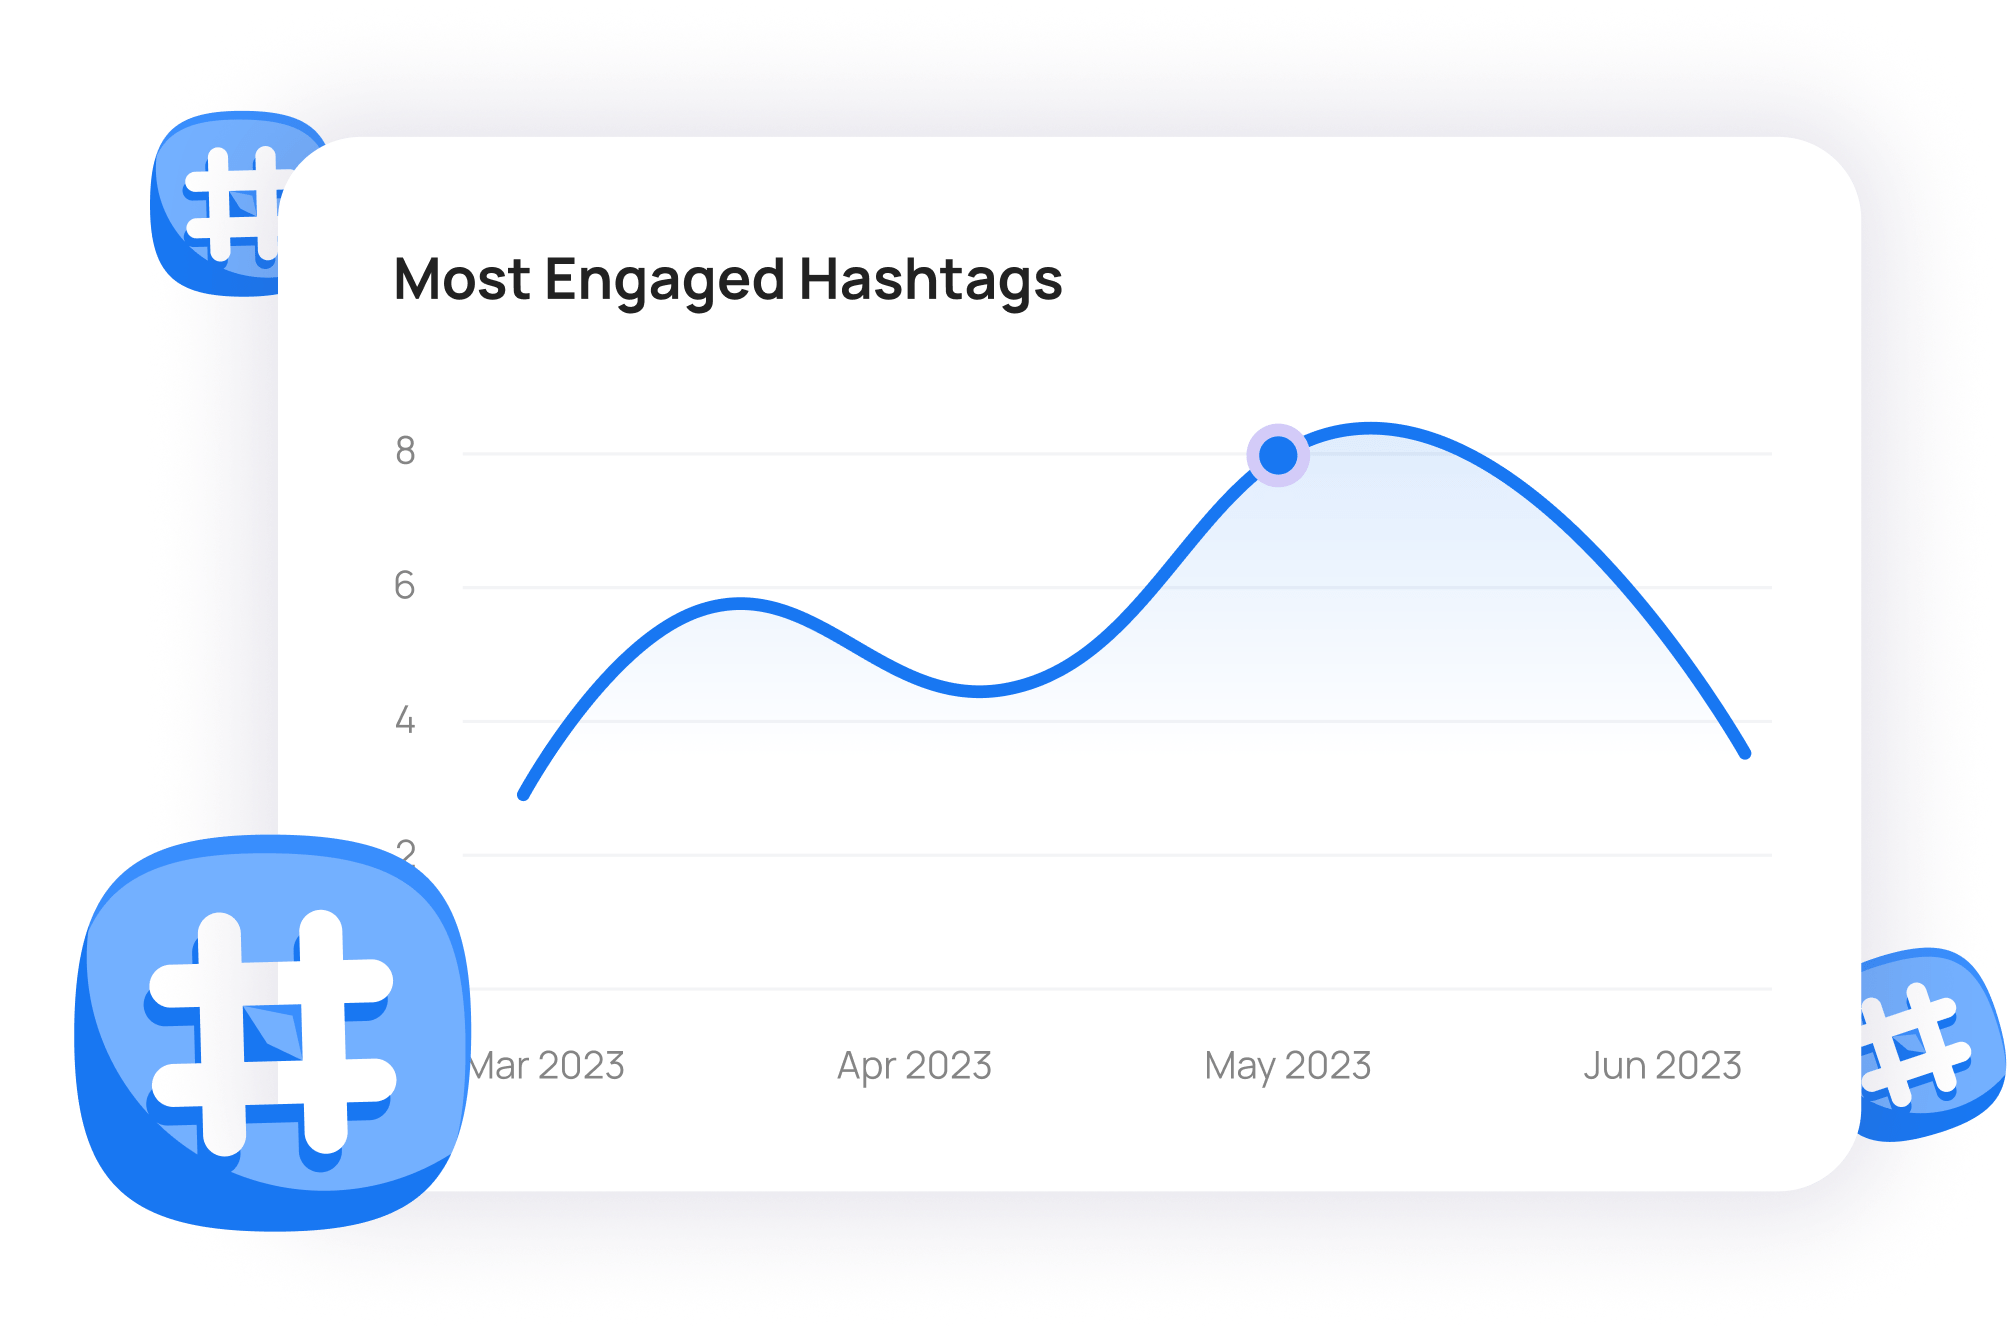 Monitor most engaged hashtags